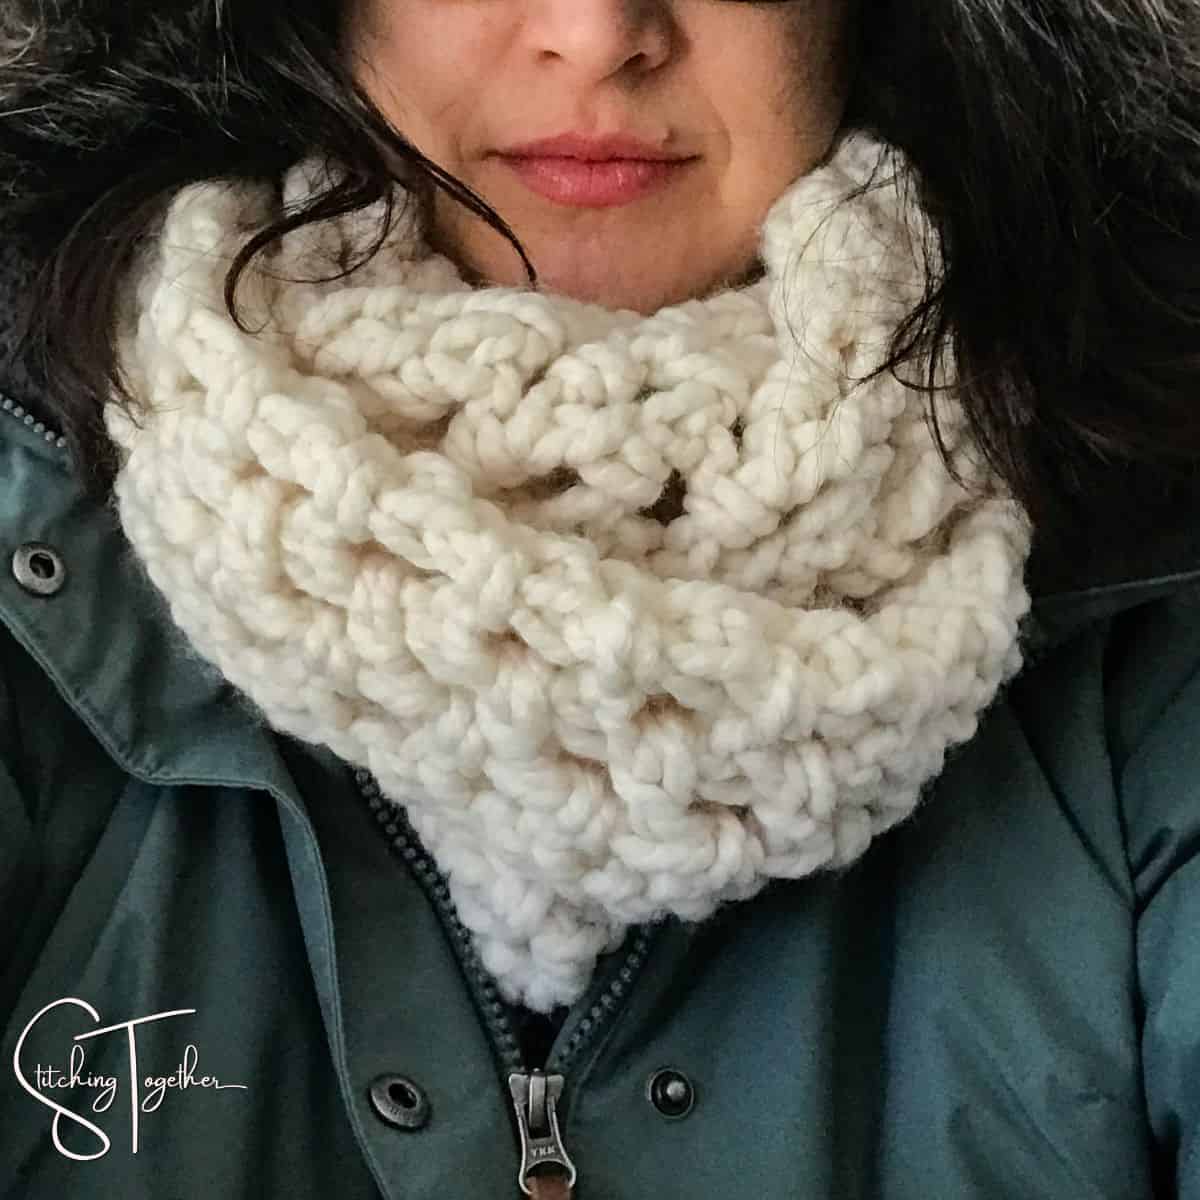 lady wearing a coat and bulky crochet scarf